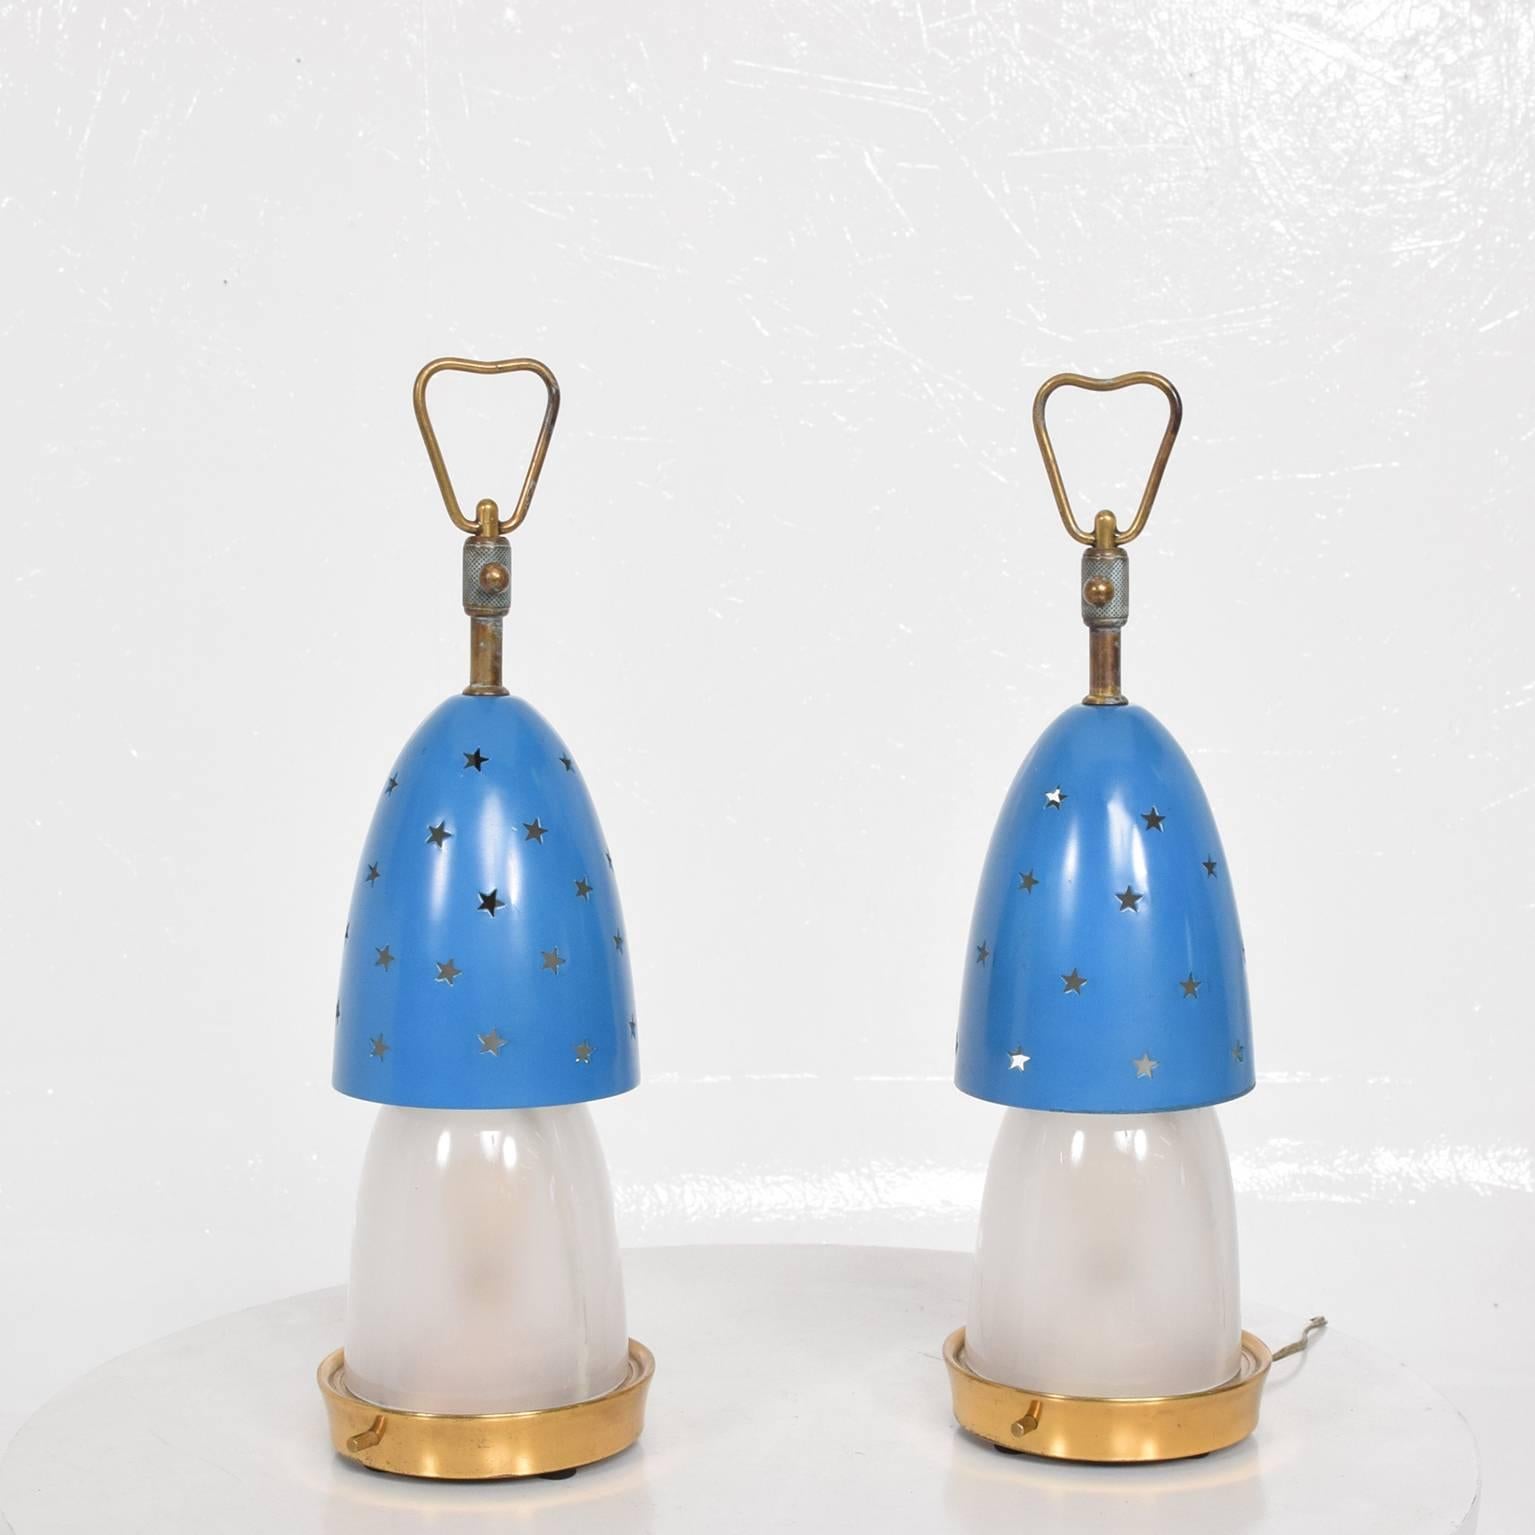 For your consideration a pair of table lamps by Angelo Lelli for Arredoluce, Italy, circa 1950s.

Brass body with aluminum shades painted in blue. Original opaline glass shade. Brass has the original vintage patina. 

Dimensions: 13 1/2